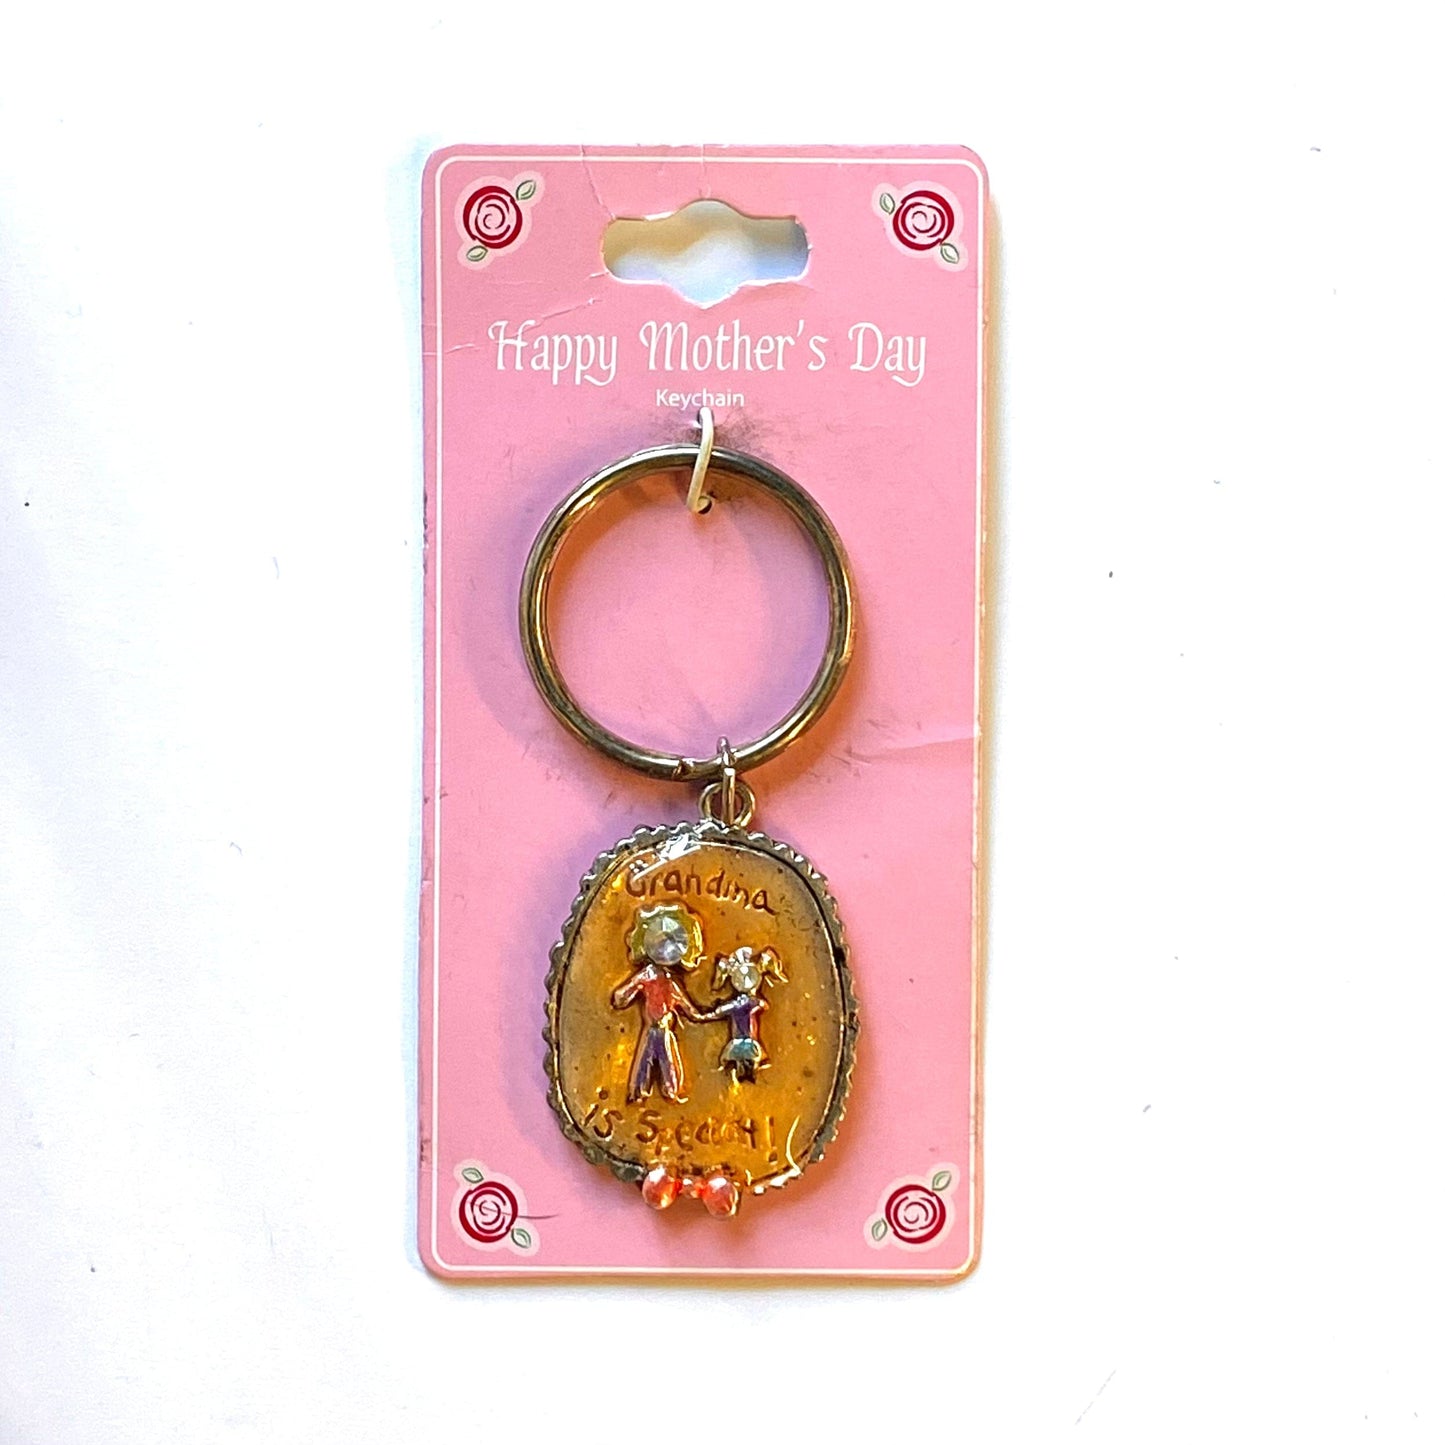 Happy Mothers Day “Grandma is Special” Keychain Key Ring Metal